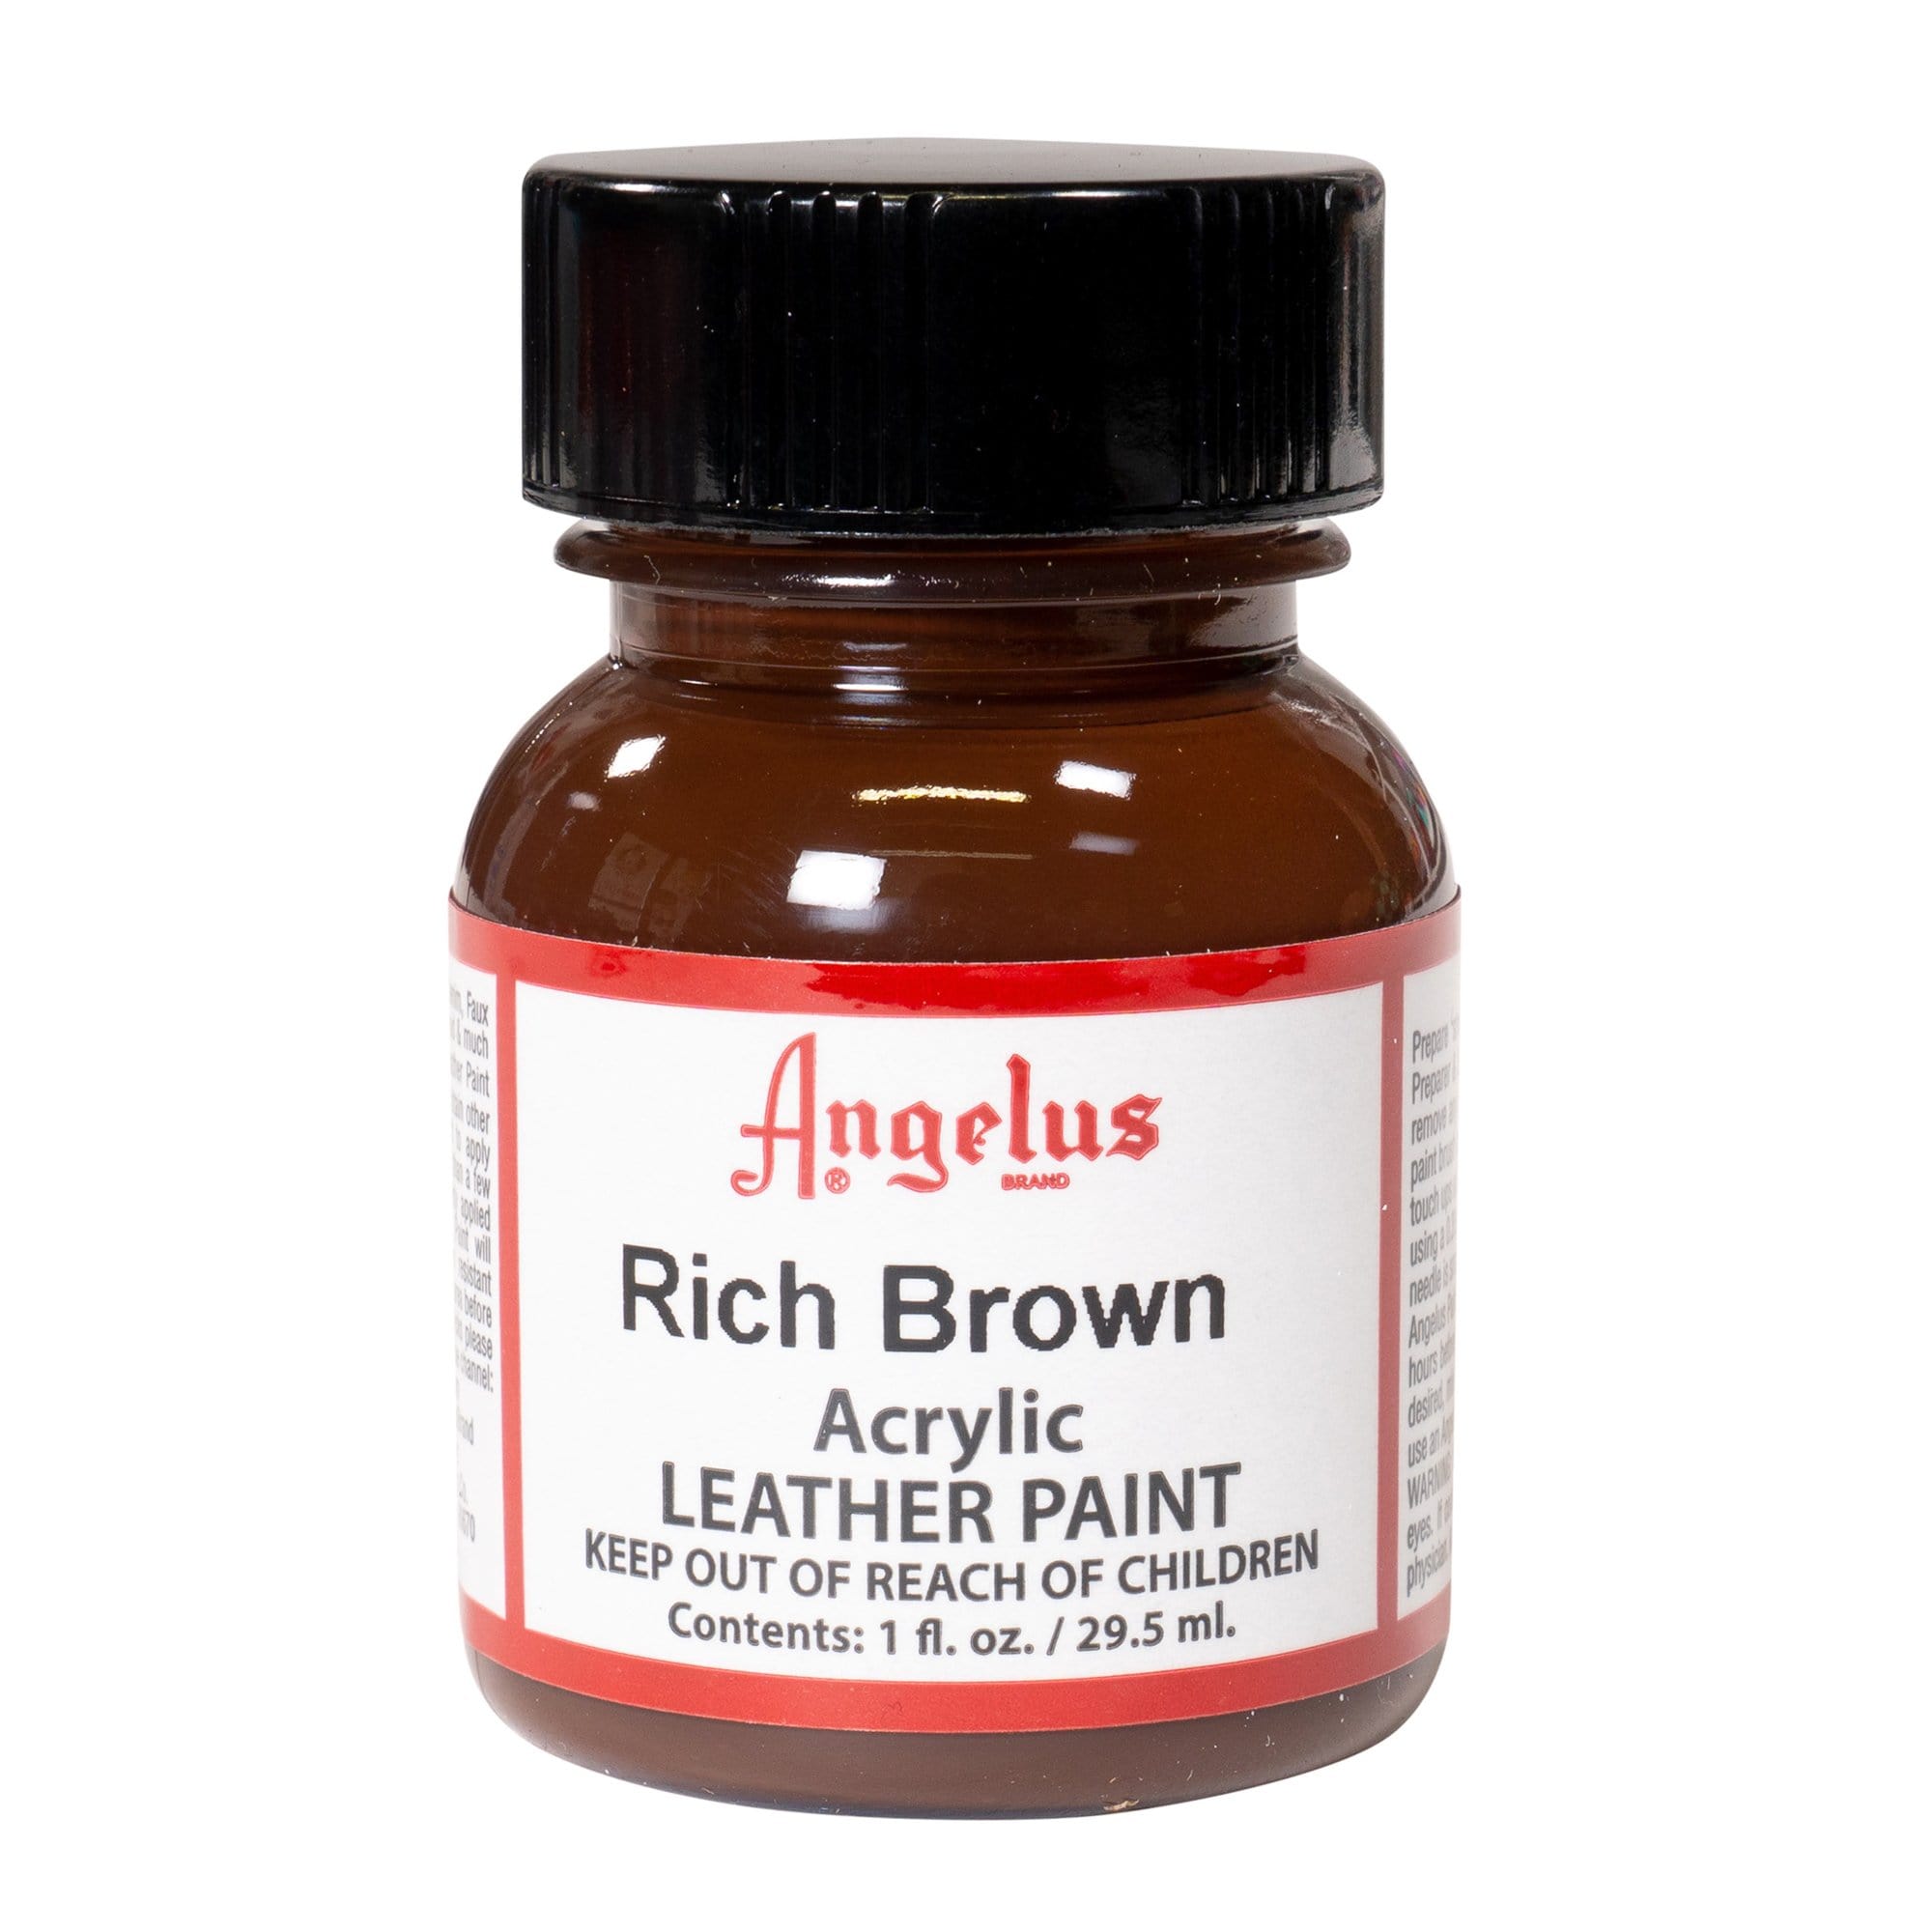 Angelus Acrylic Leather Paint - Rich Brown, 1 oz